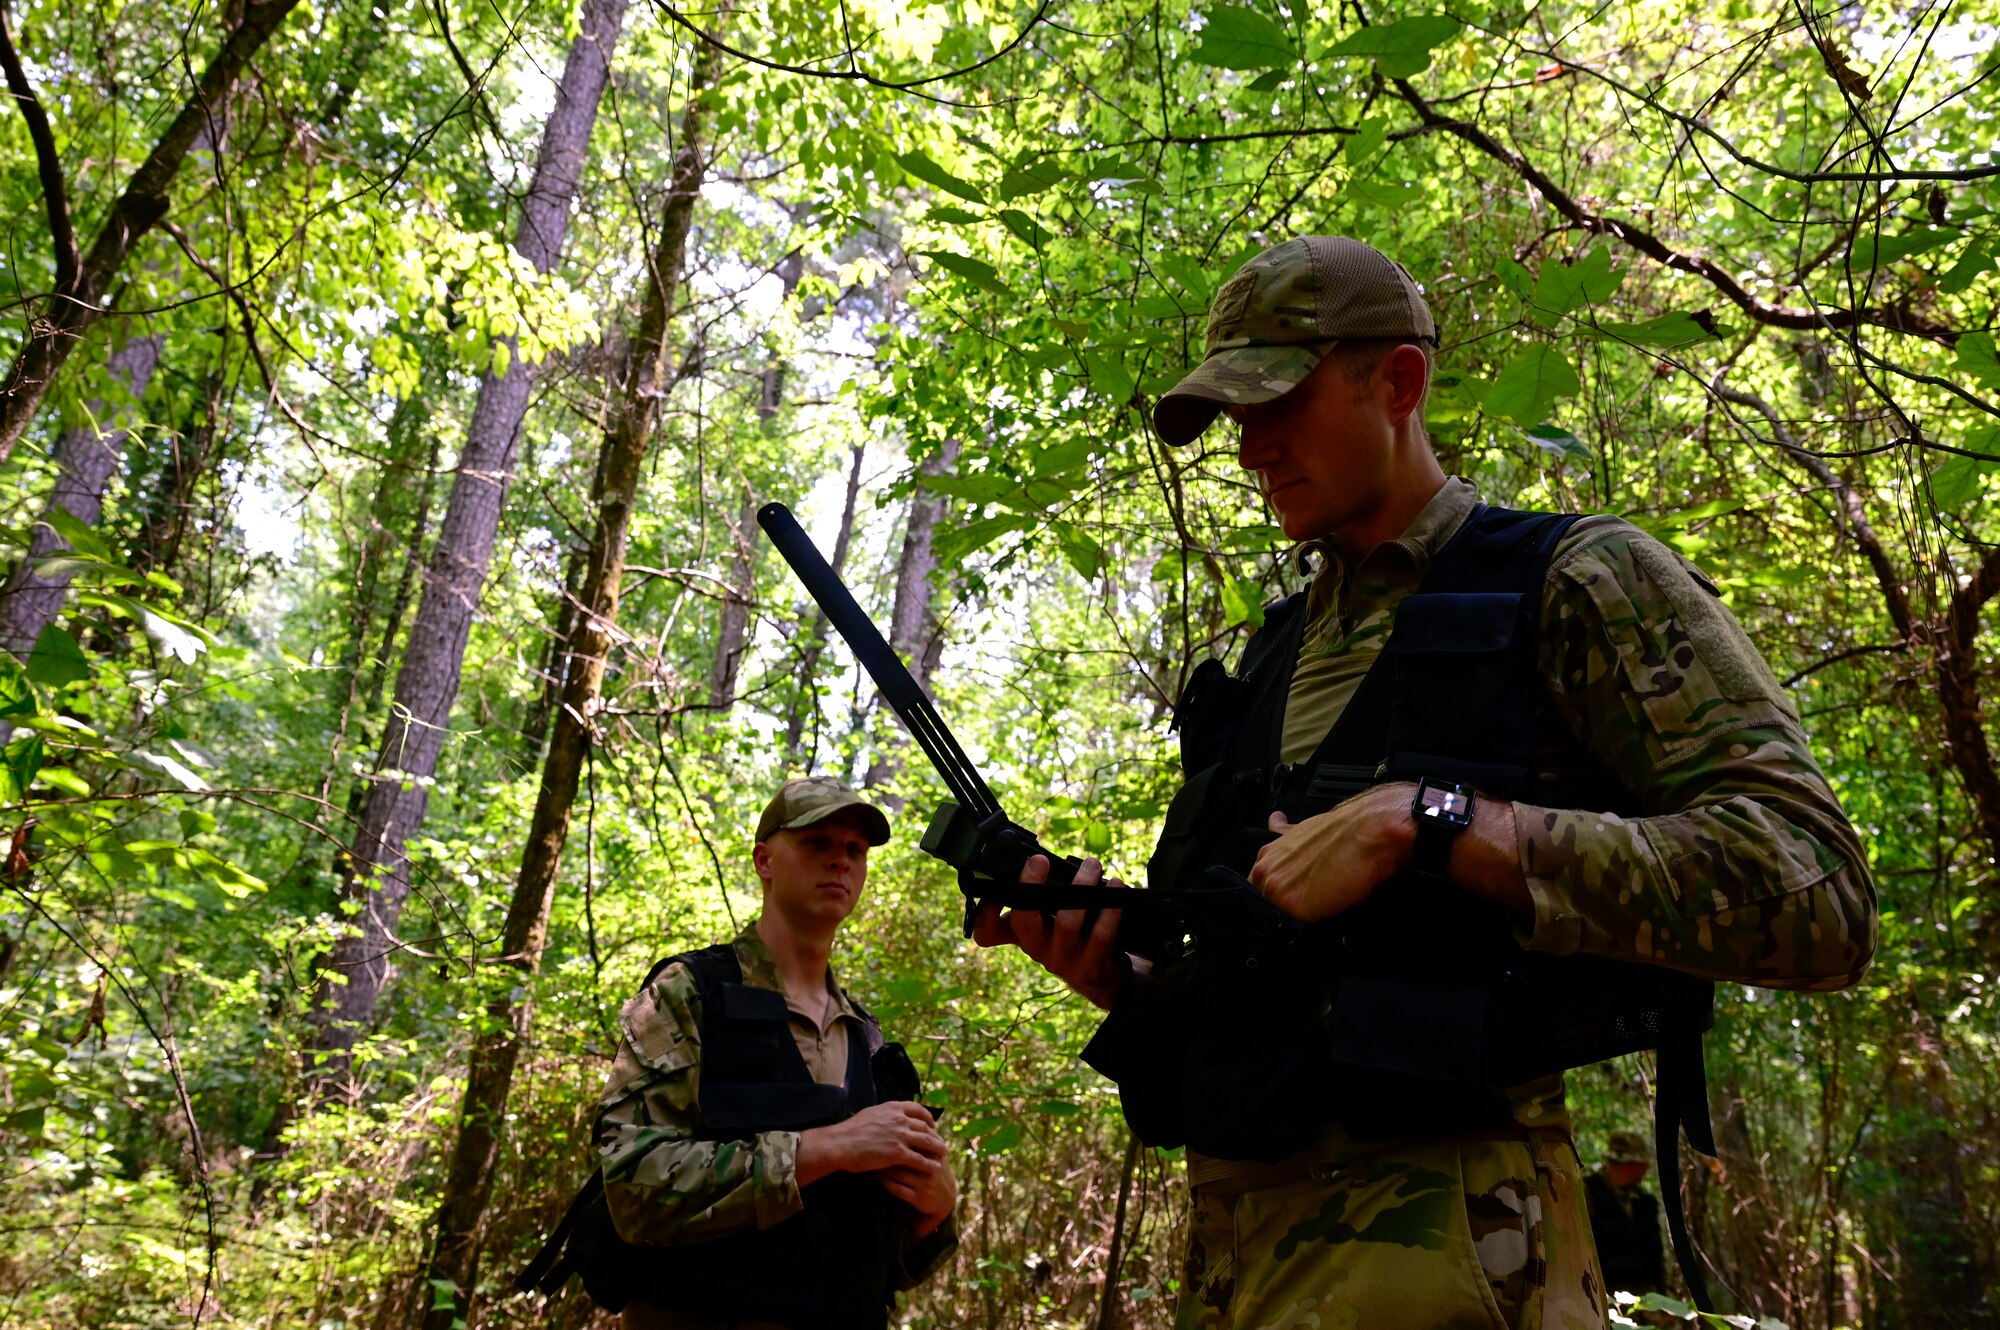 Two Airman go through training in the woods.